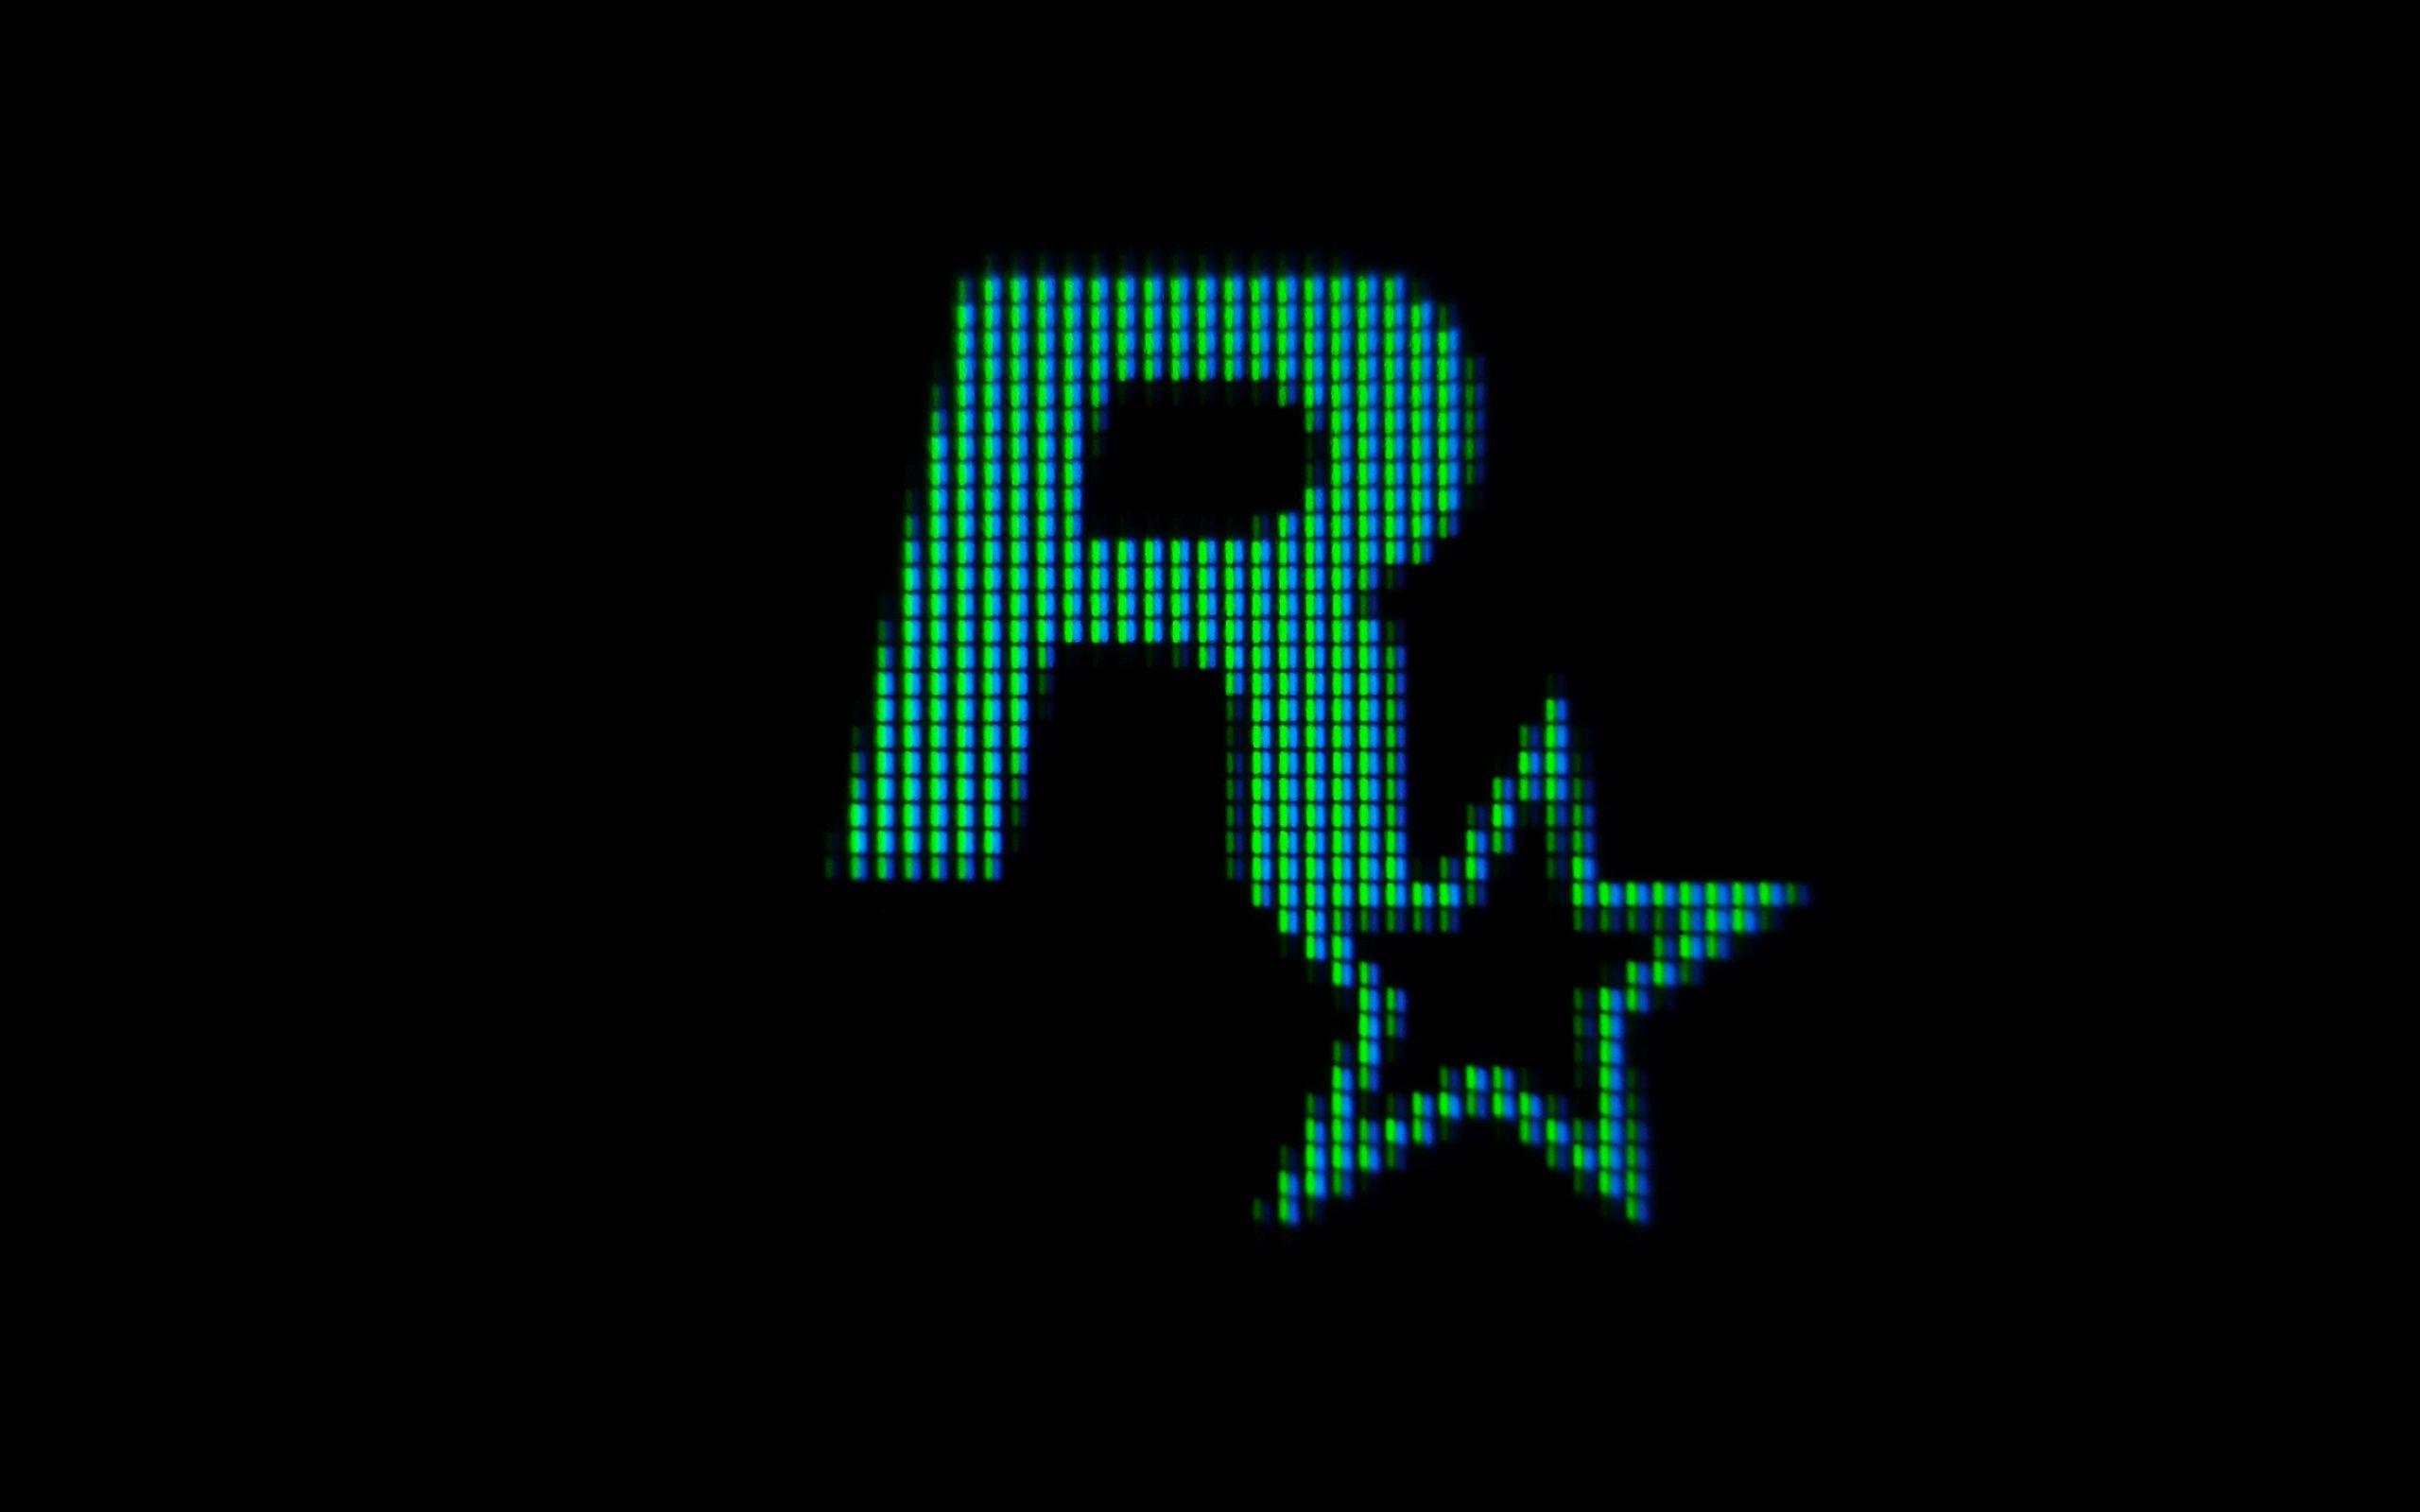 Rockstar Games Logo - Come Draw The Rockstar Games Logo On R Place Down By The Pyramid